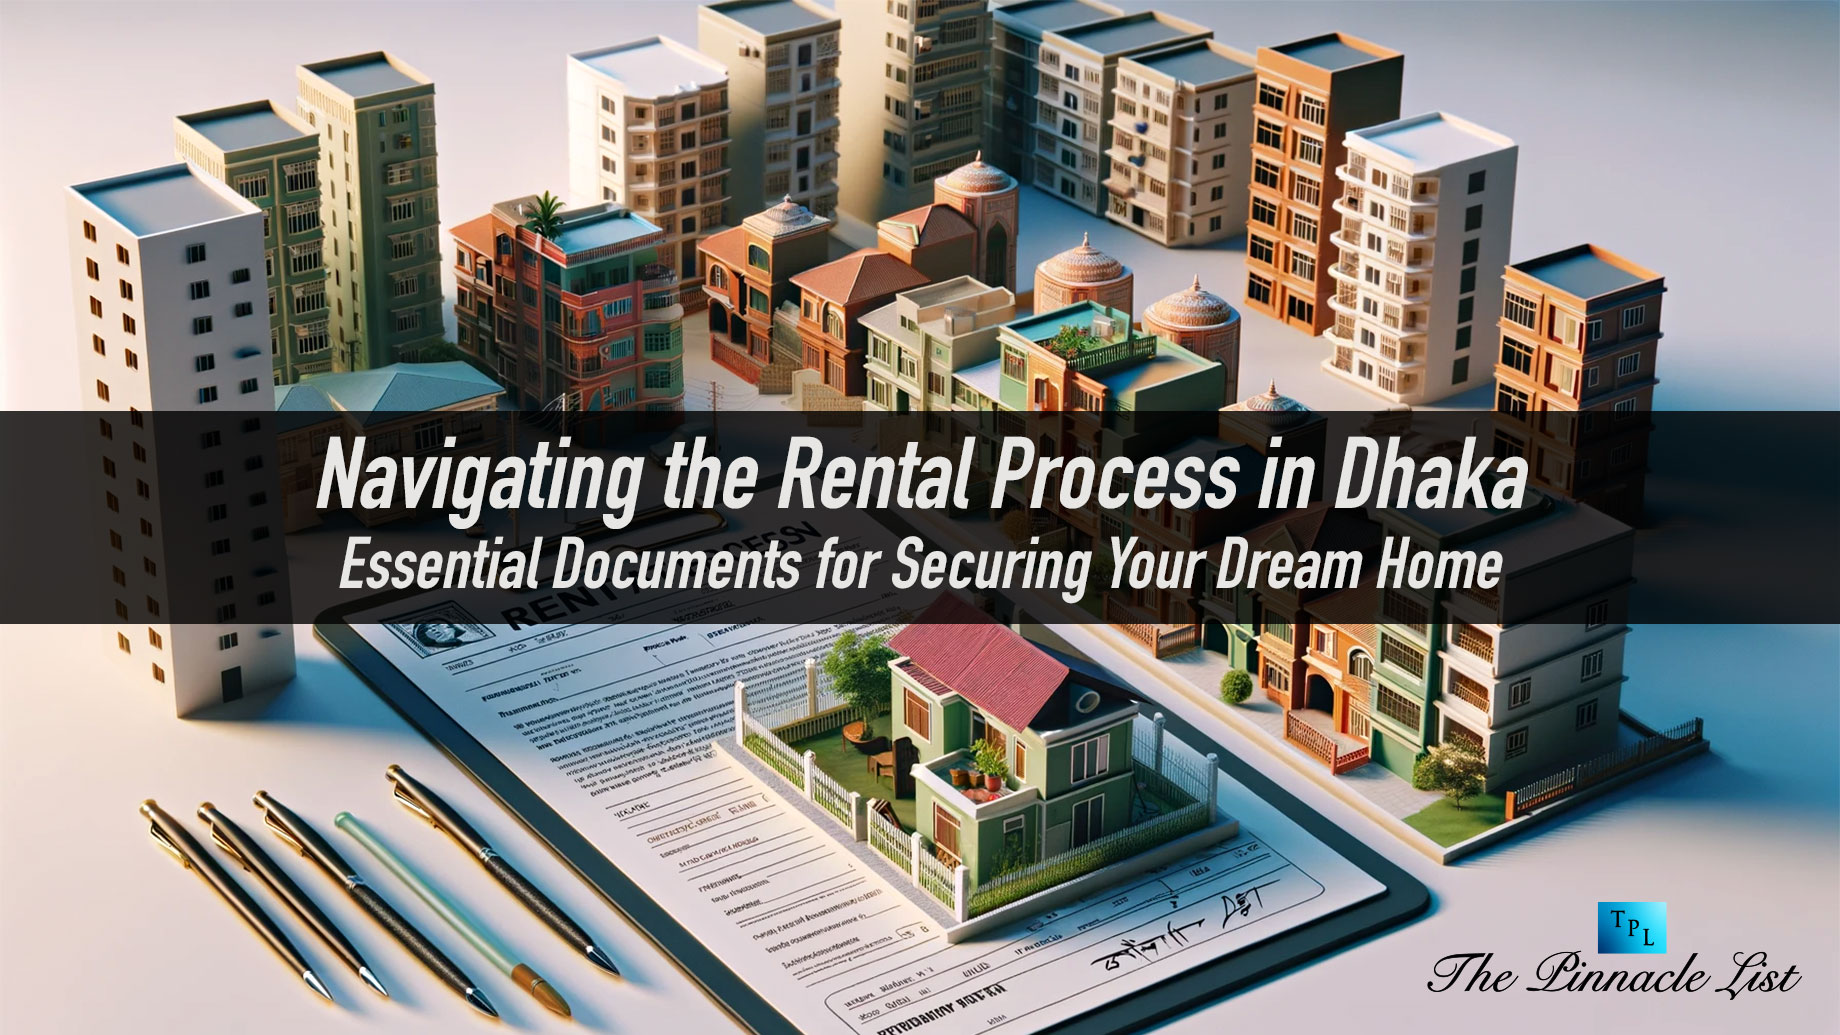 Navigating the Rental Process in Dhaka: Essential Documents for Securing Your Dream Home